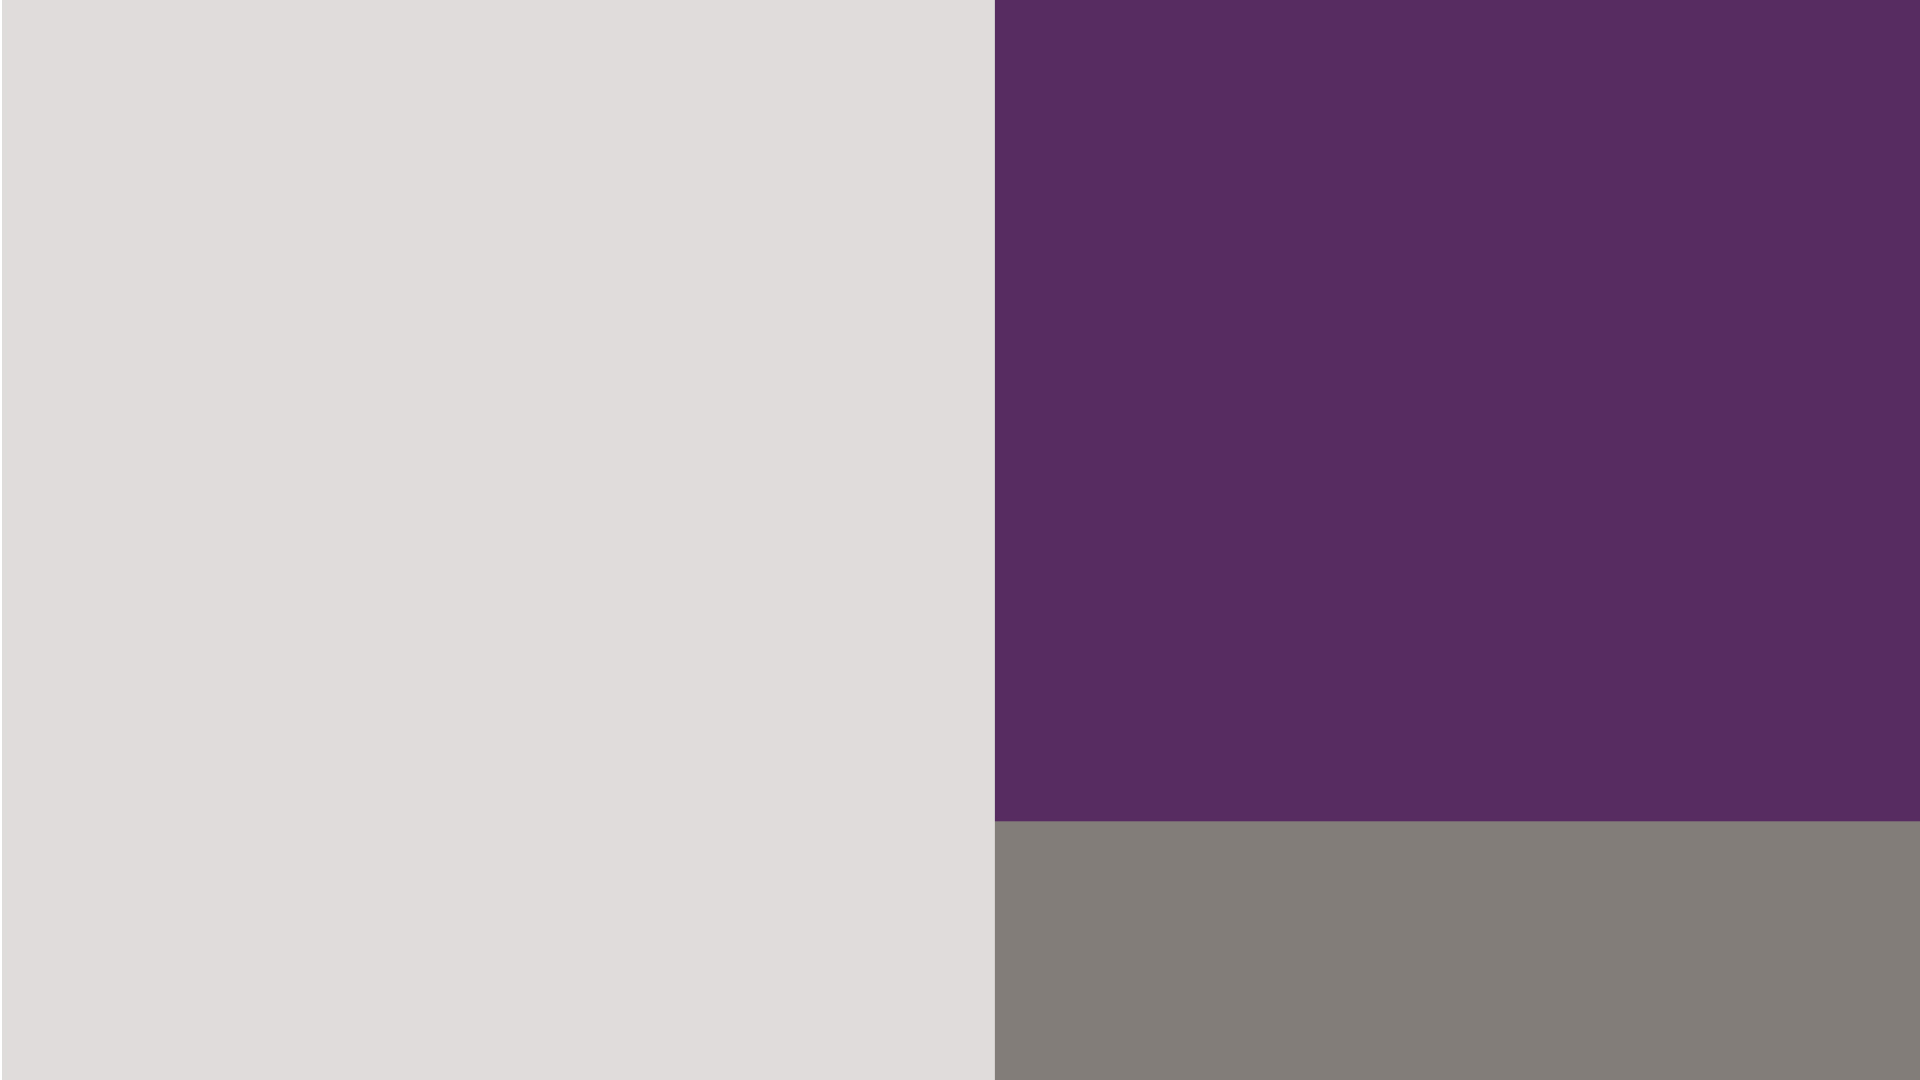 Bermans wine store color palette with gray, purple and tan